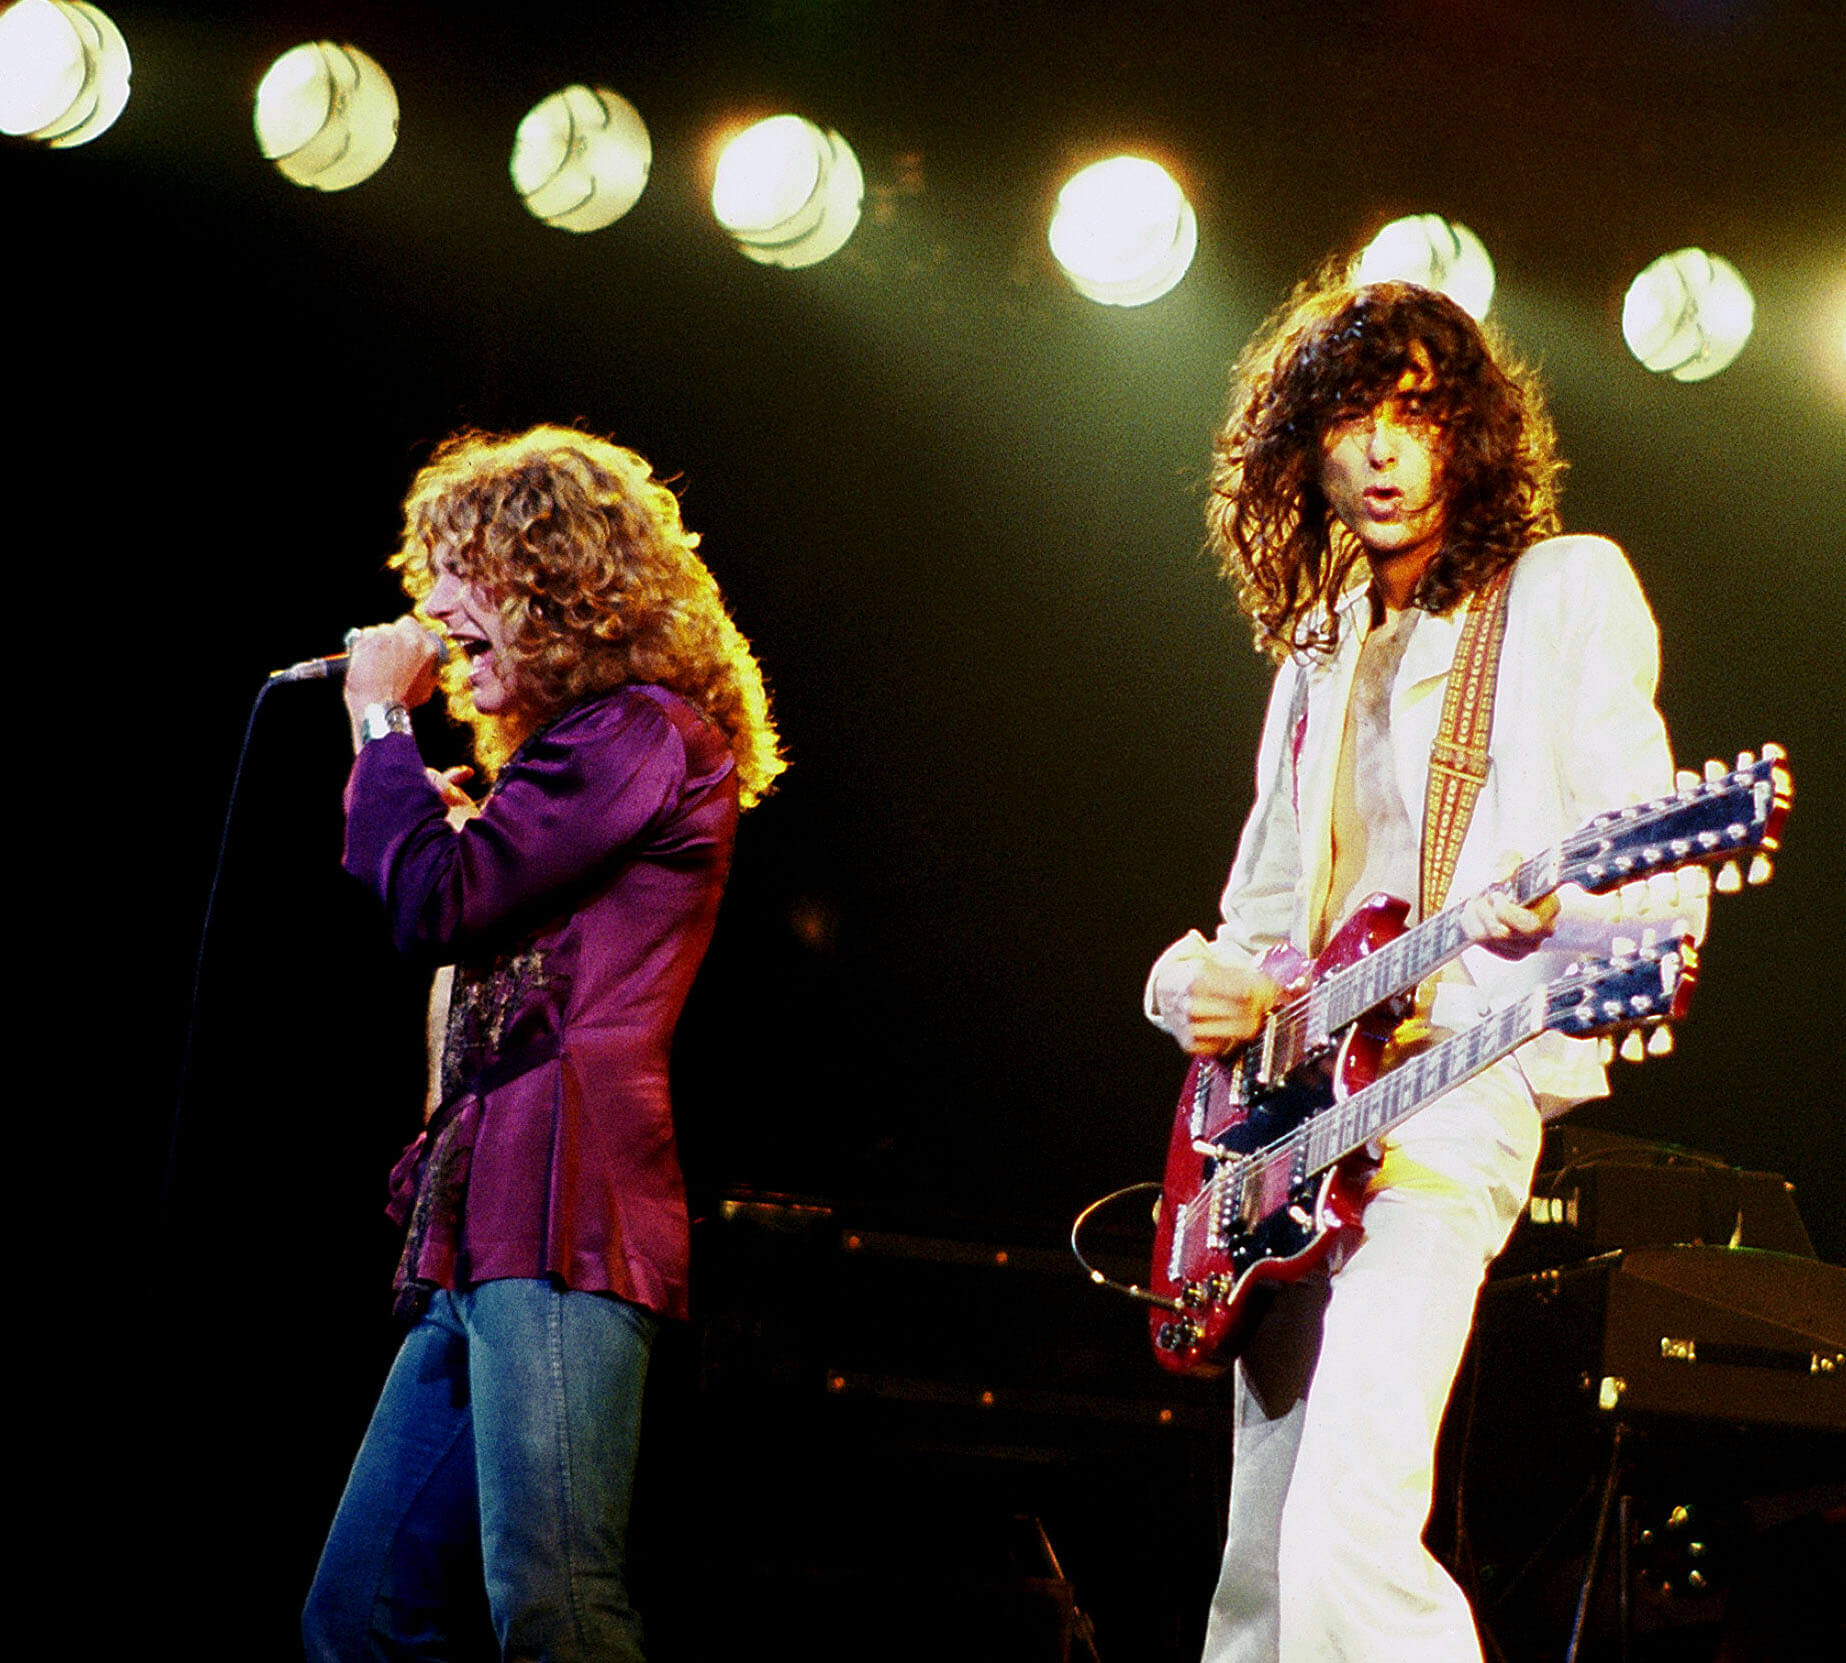 Jimmy Page (left) on stage with Robert Plant (right)